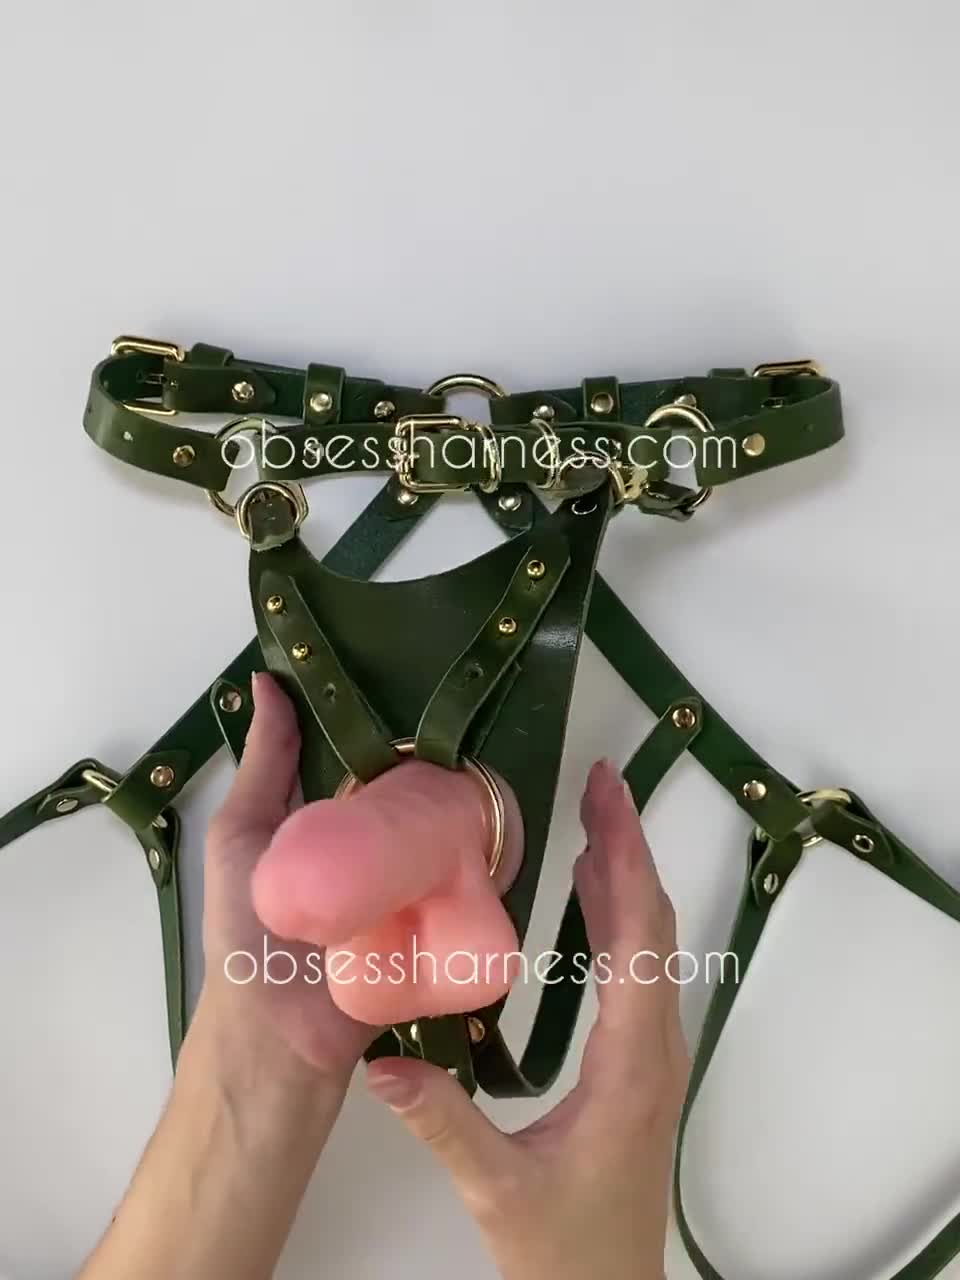 Strap on Harness Plus Size, Harness Pegging, Dildo Harness, BDSM